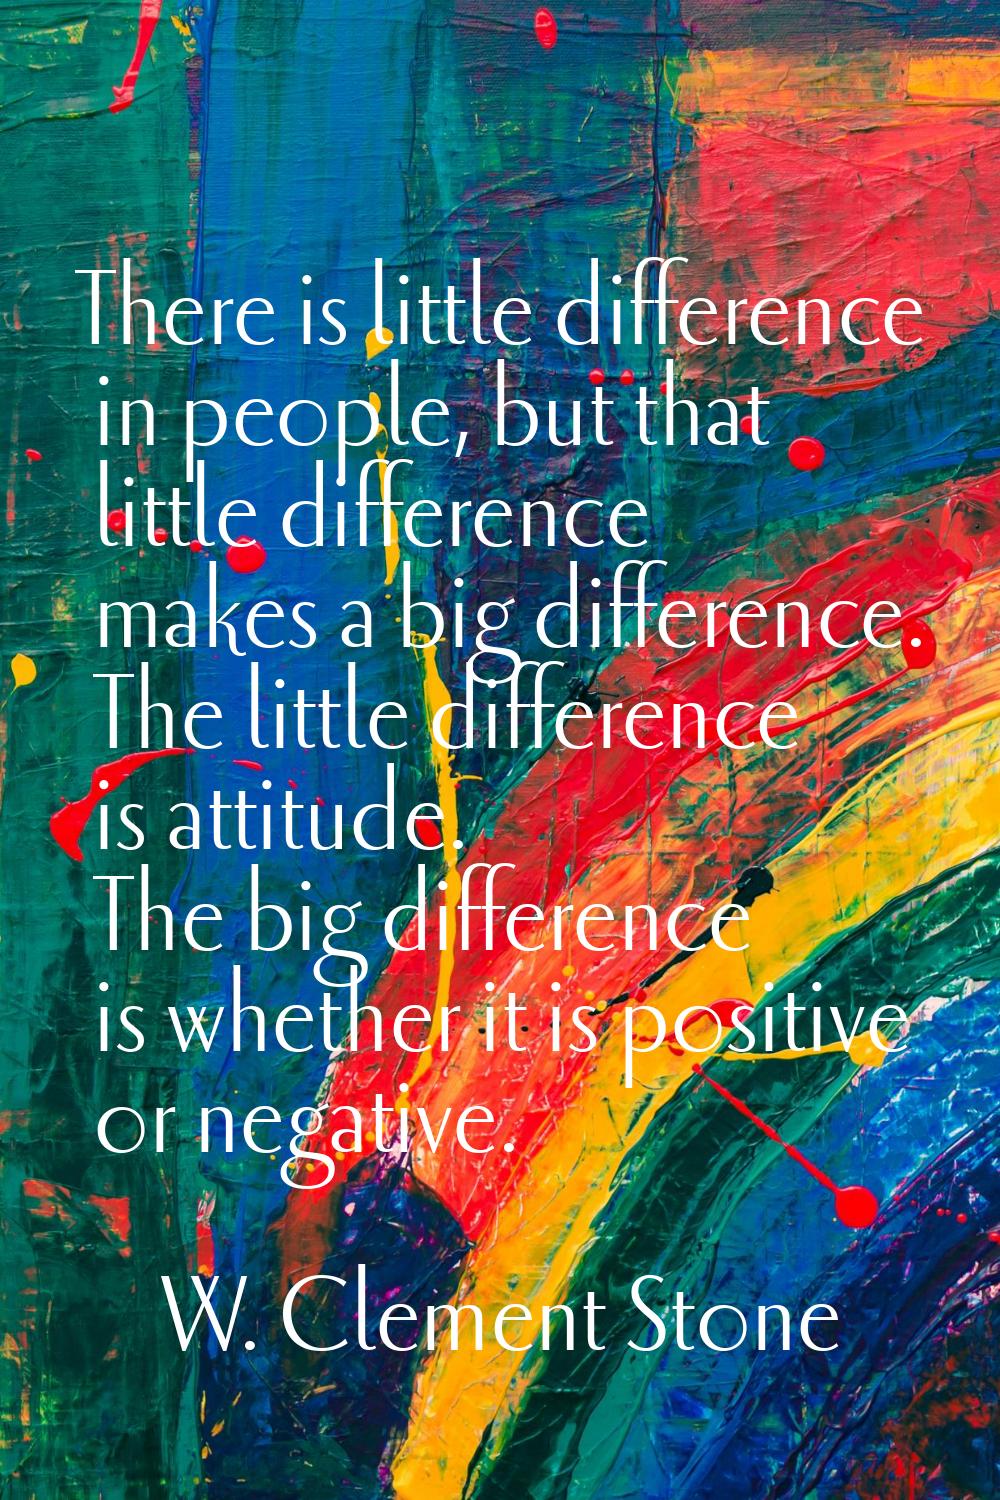 There is little difference in people, but that little difference makes a big difference. The little